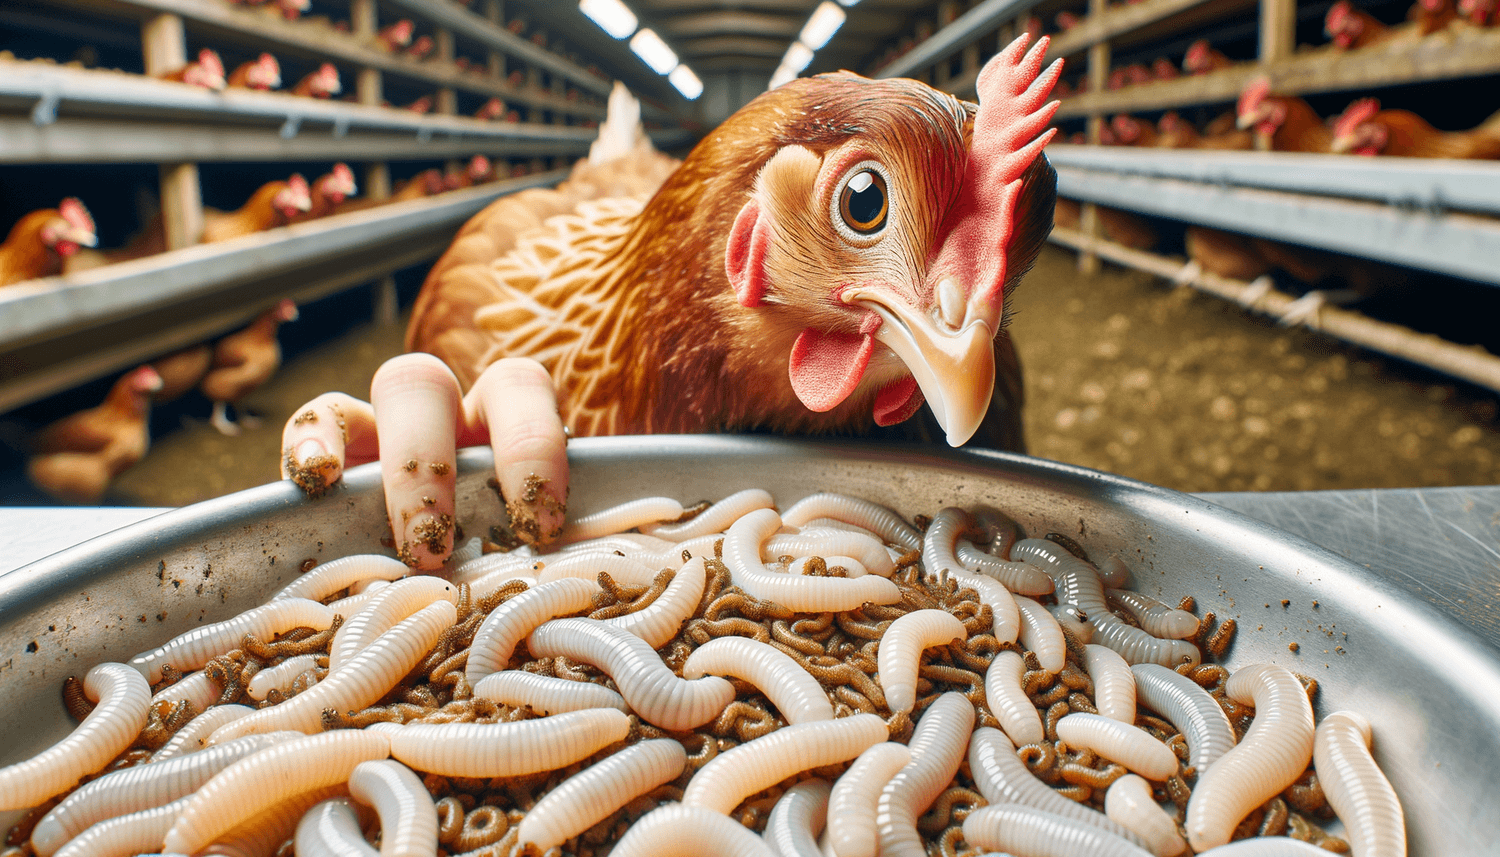 Can Chickens Eat Live Maggots?